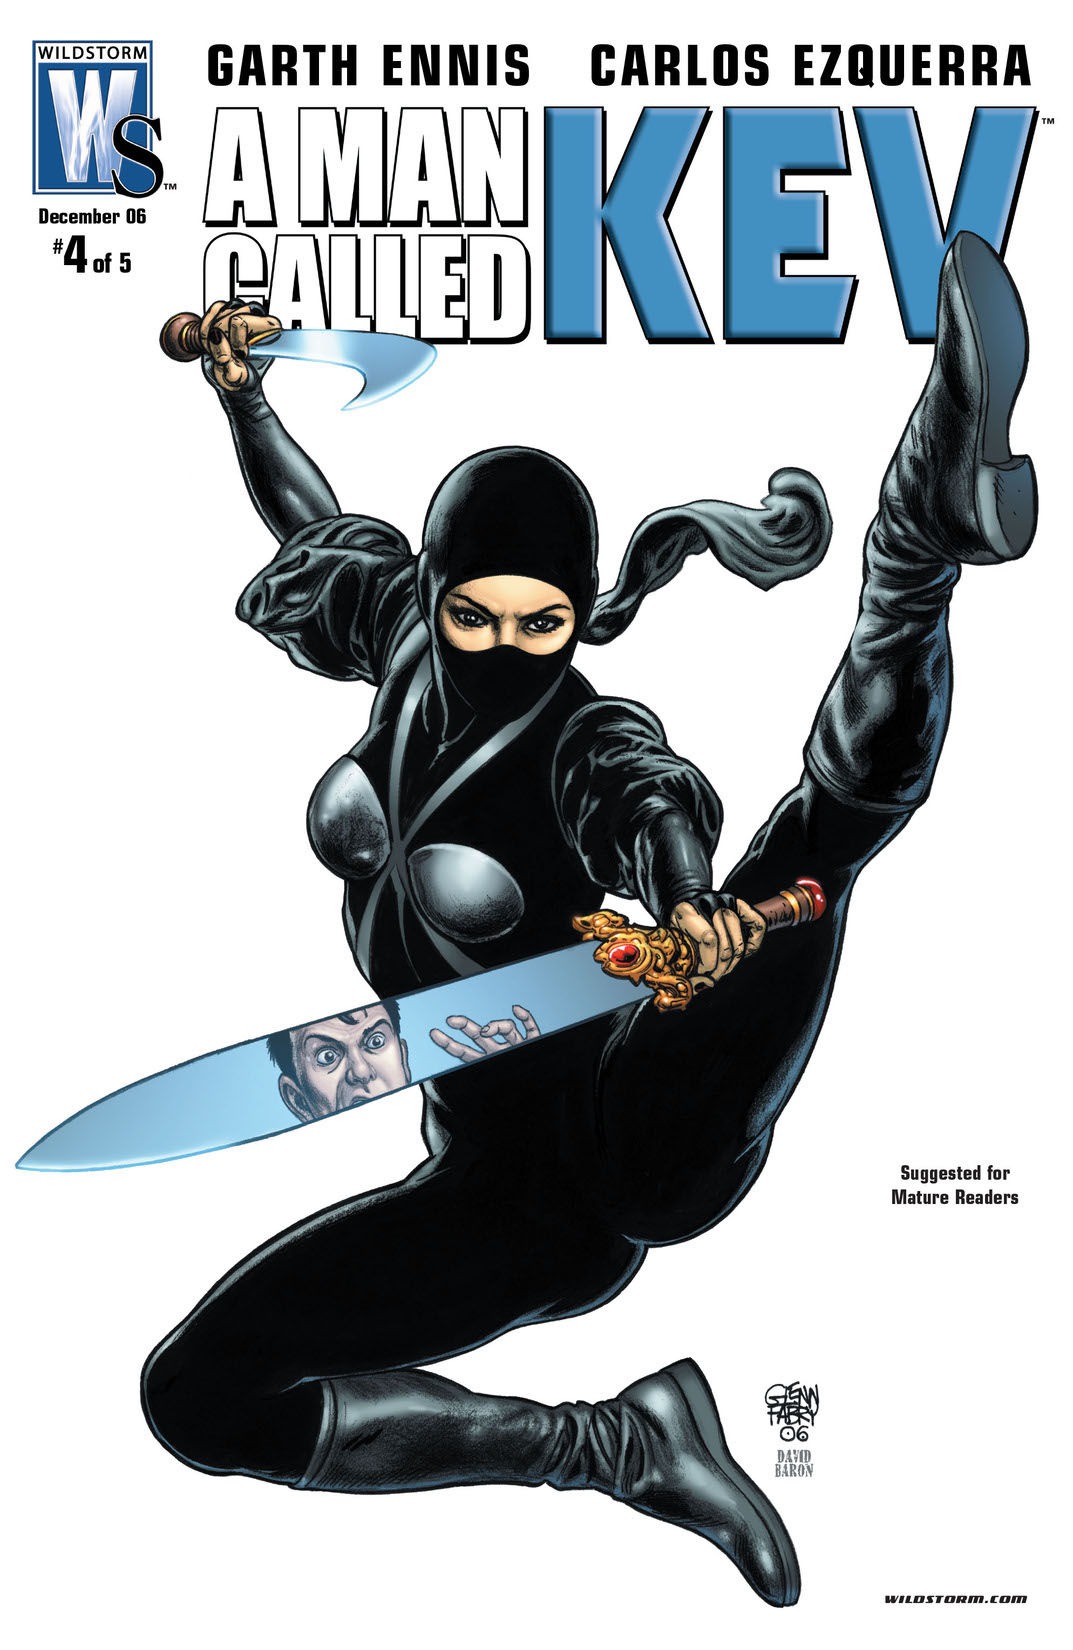 A Man Called Kev #4 preview images